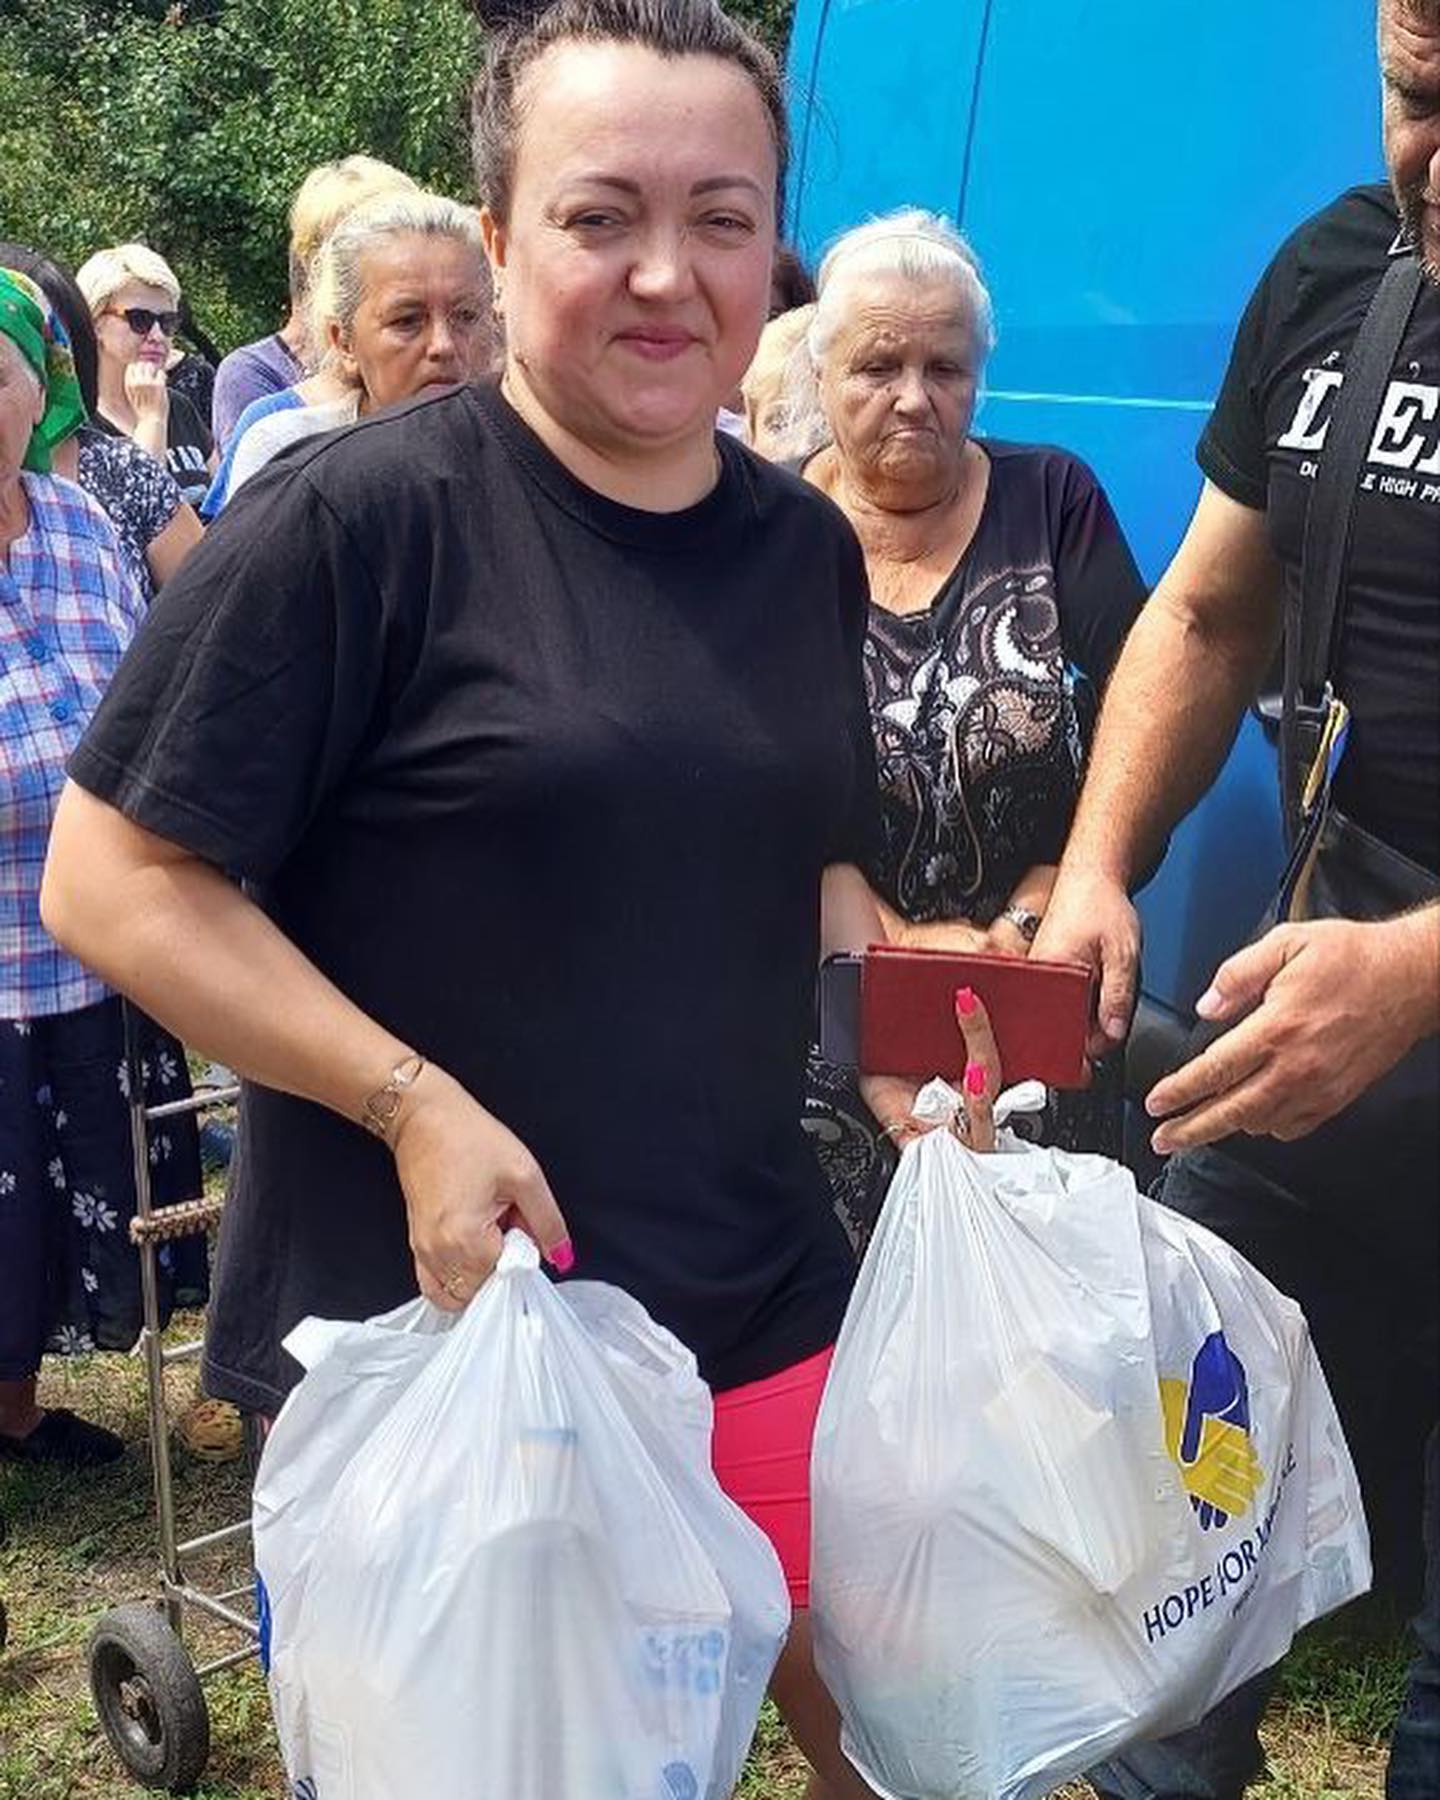 A woman is standing next to a group of people with bags.